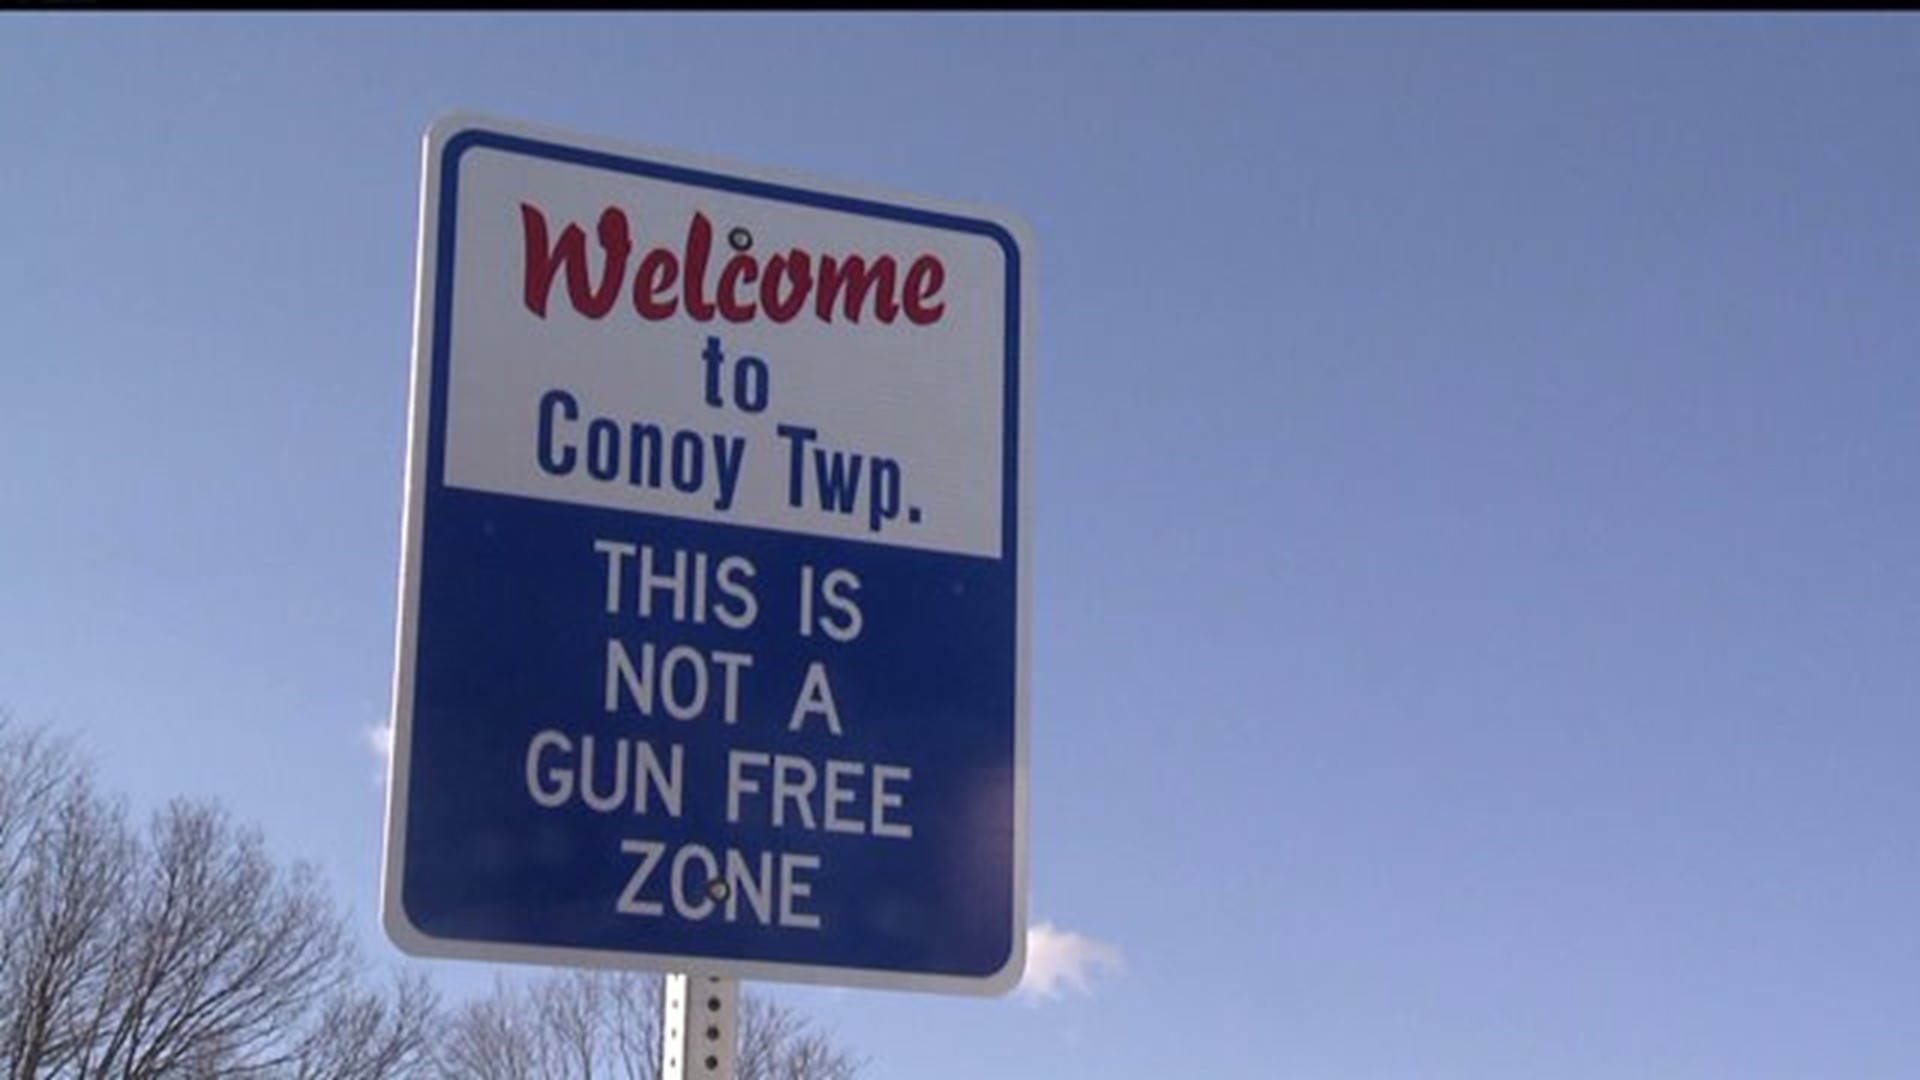 Conoy Township is "Not a Gun-Free Zone"